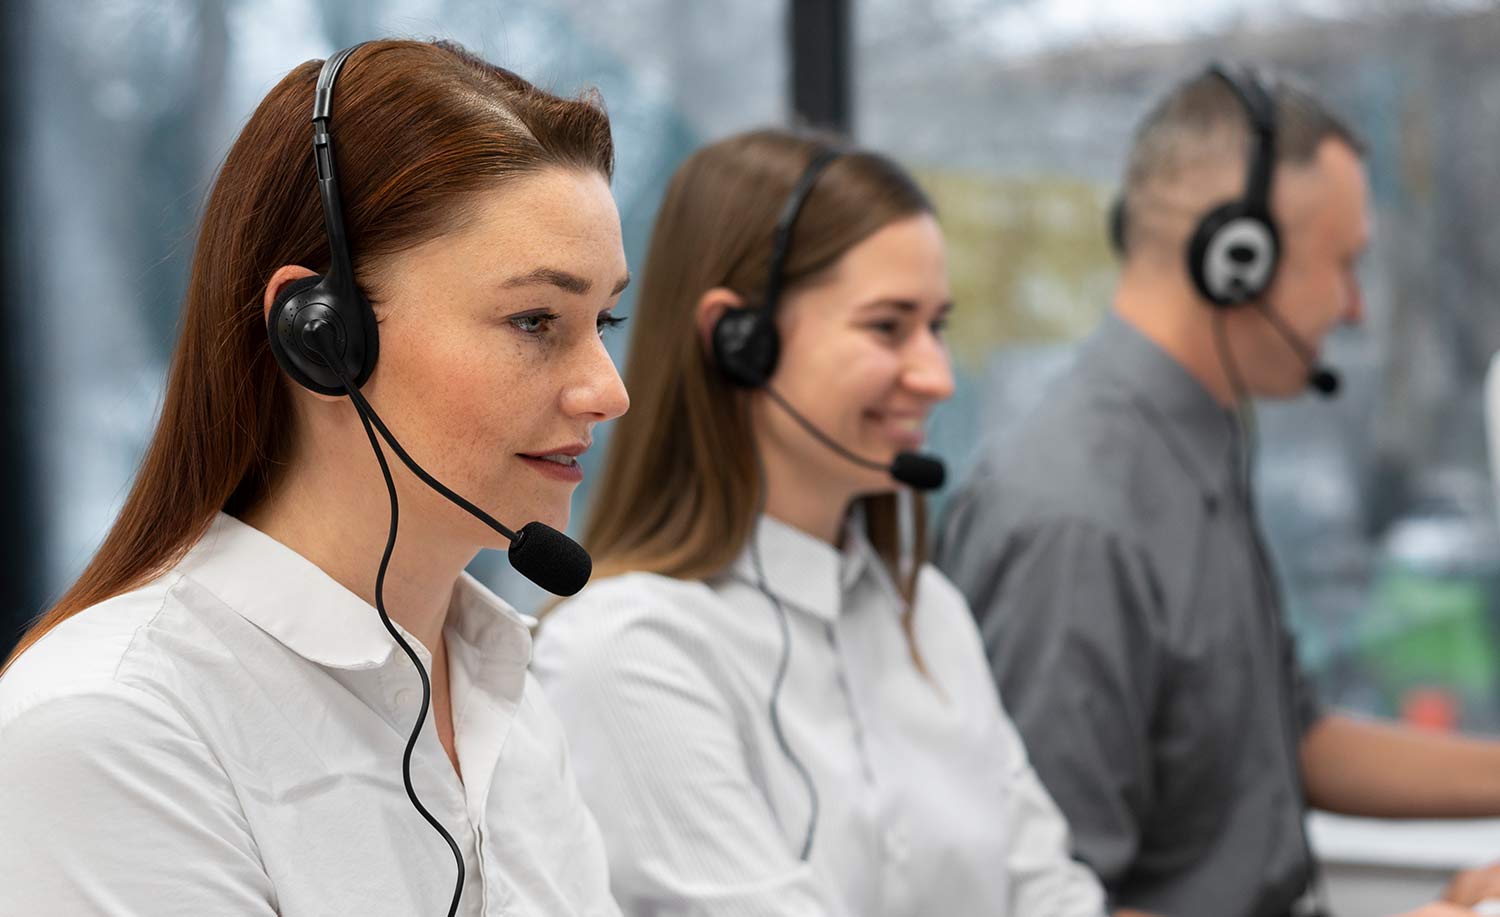 24/7 Answering Service